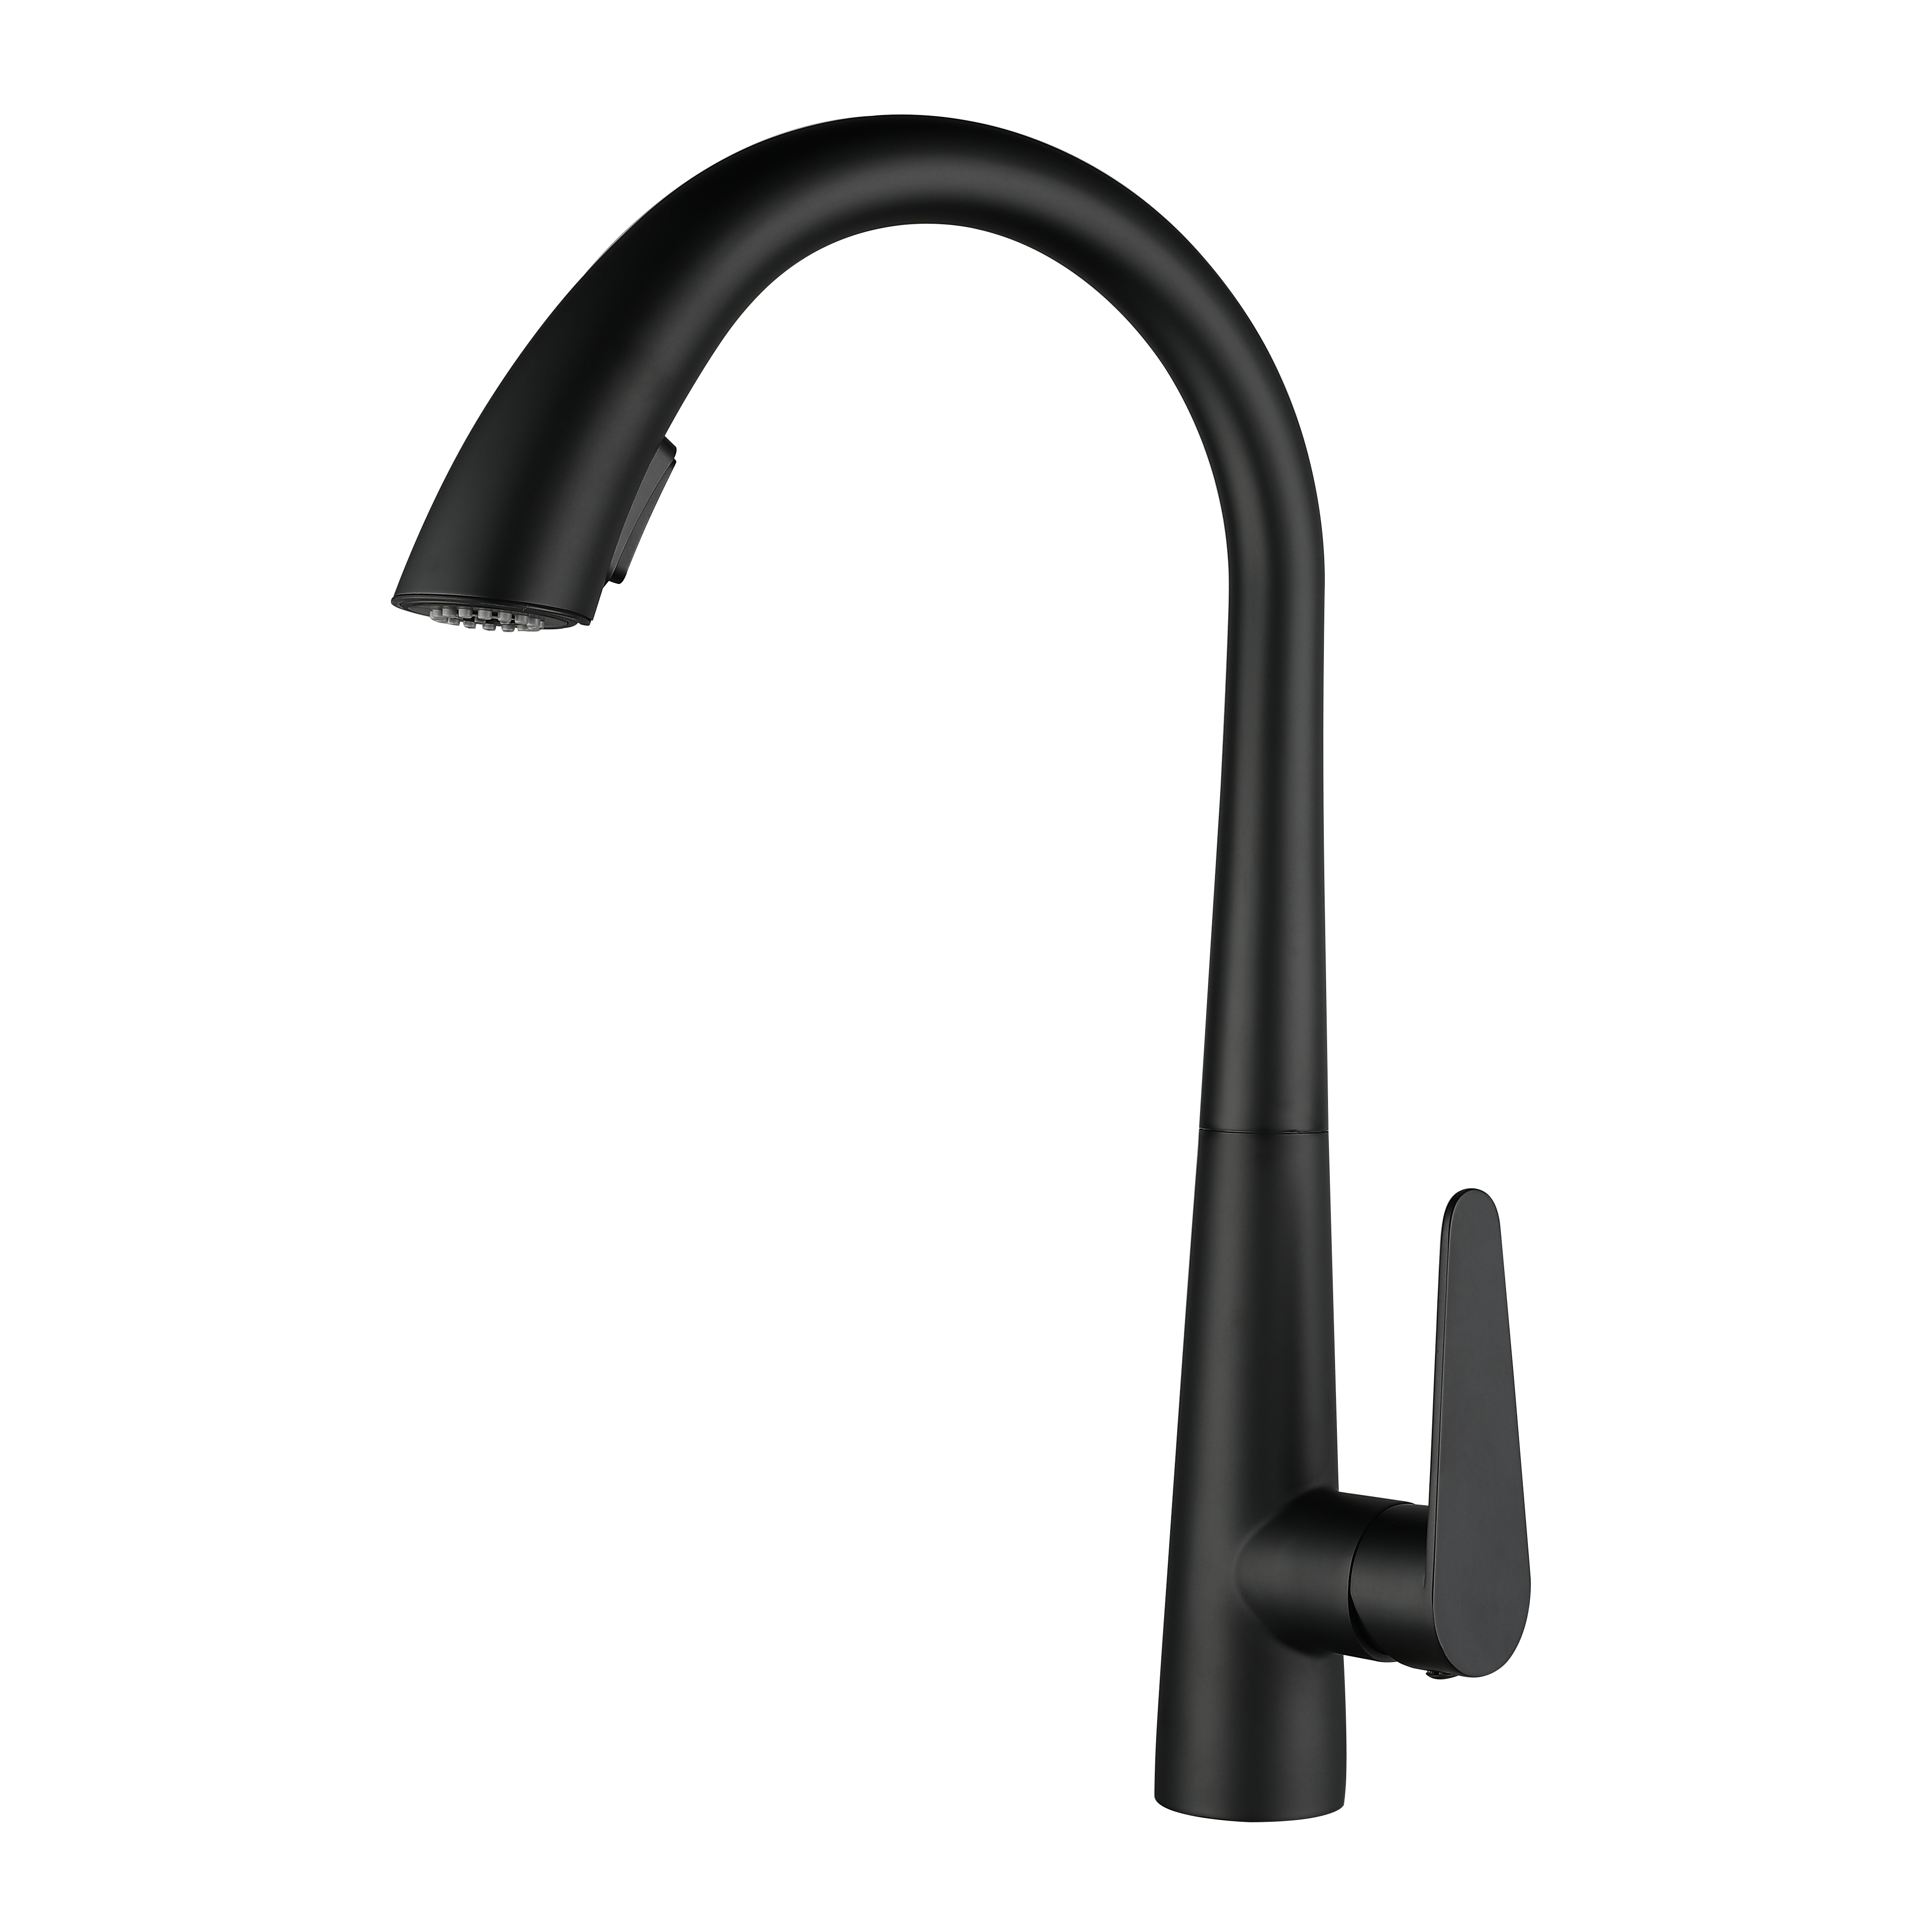 Black faucet stainless steel Kitchen Faucet Flexible Pull down  Faucet with Sprayer Dexing ODM/OEM Faucet black